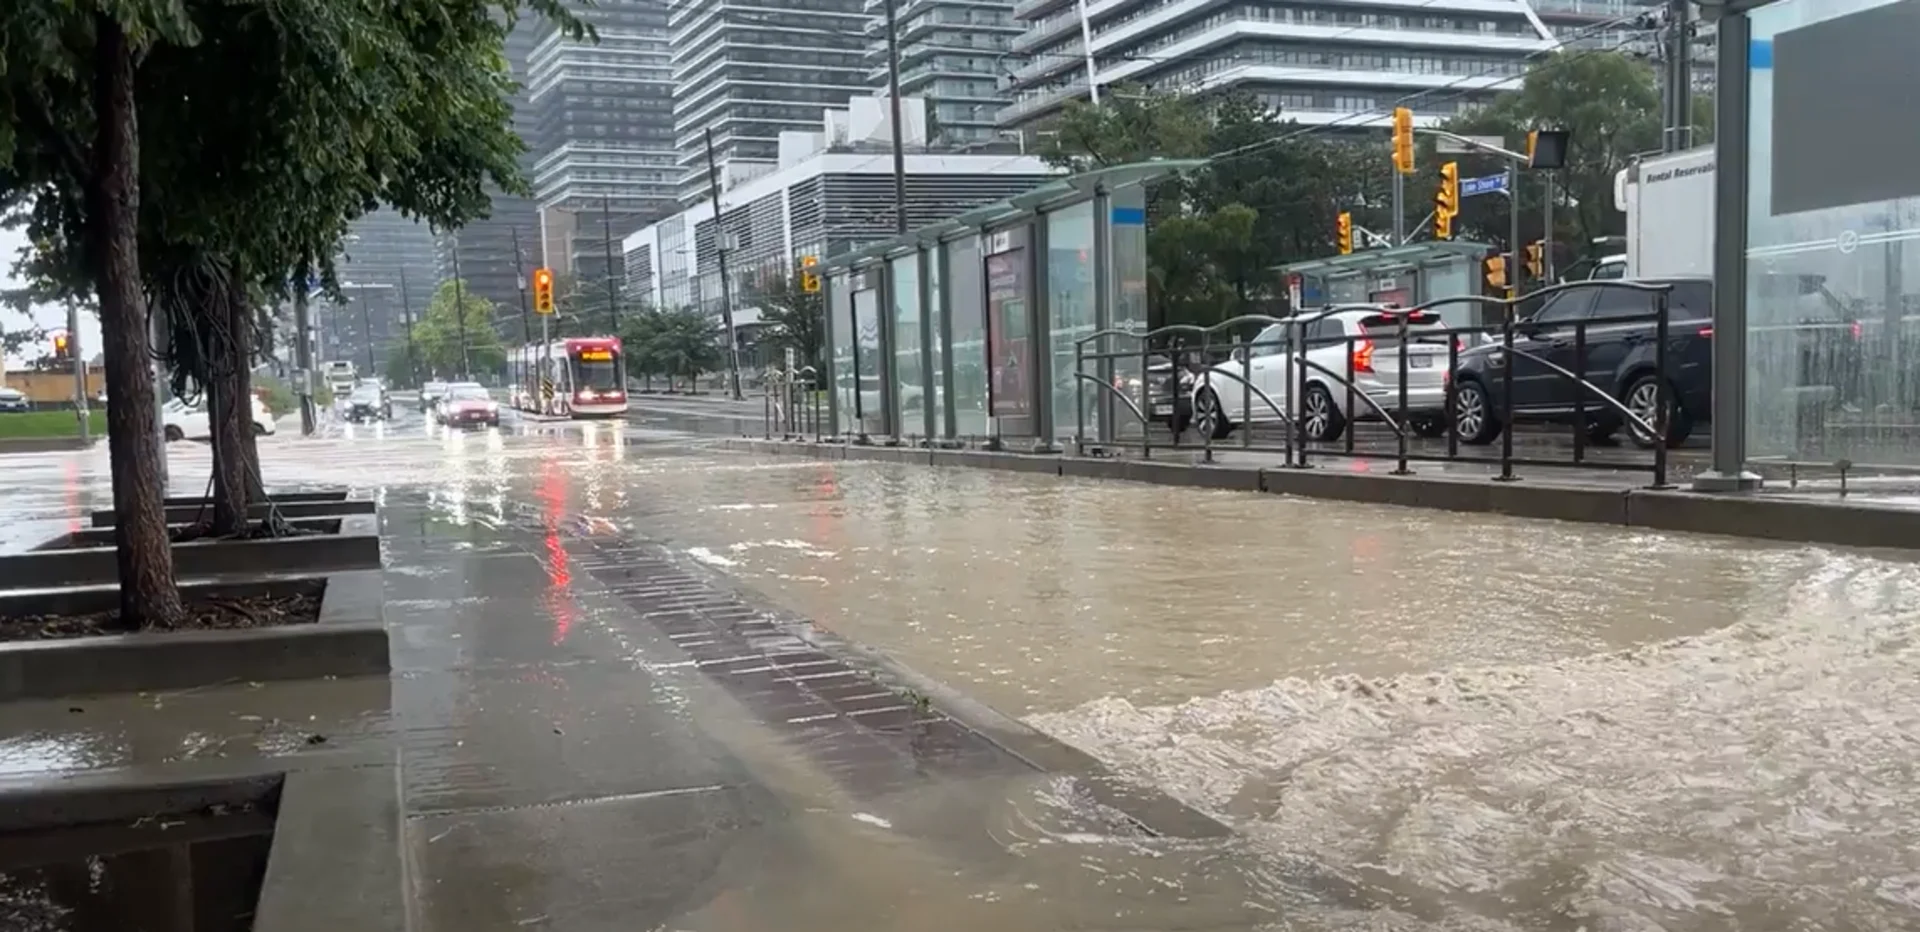 PHOTOS: Significant flooding shuts down major roads in southern Ontario